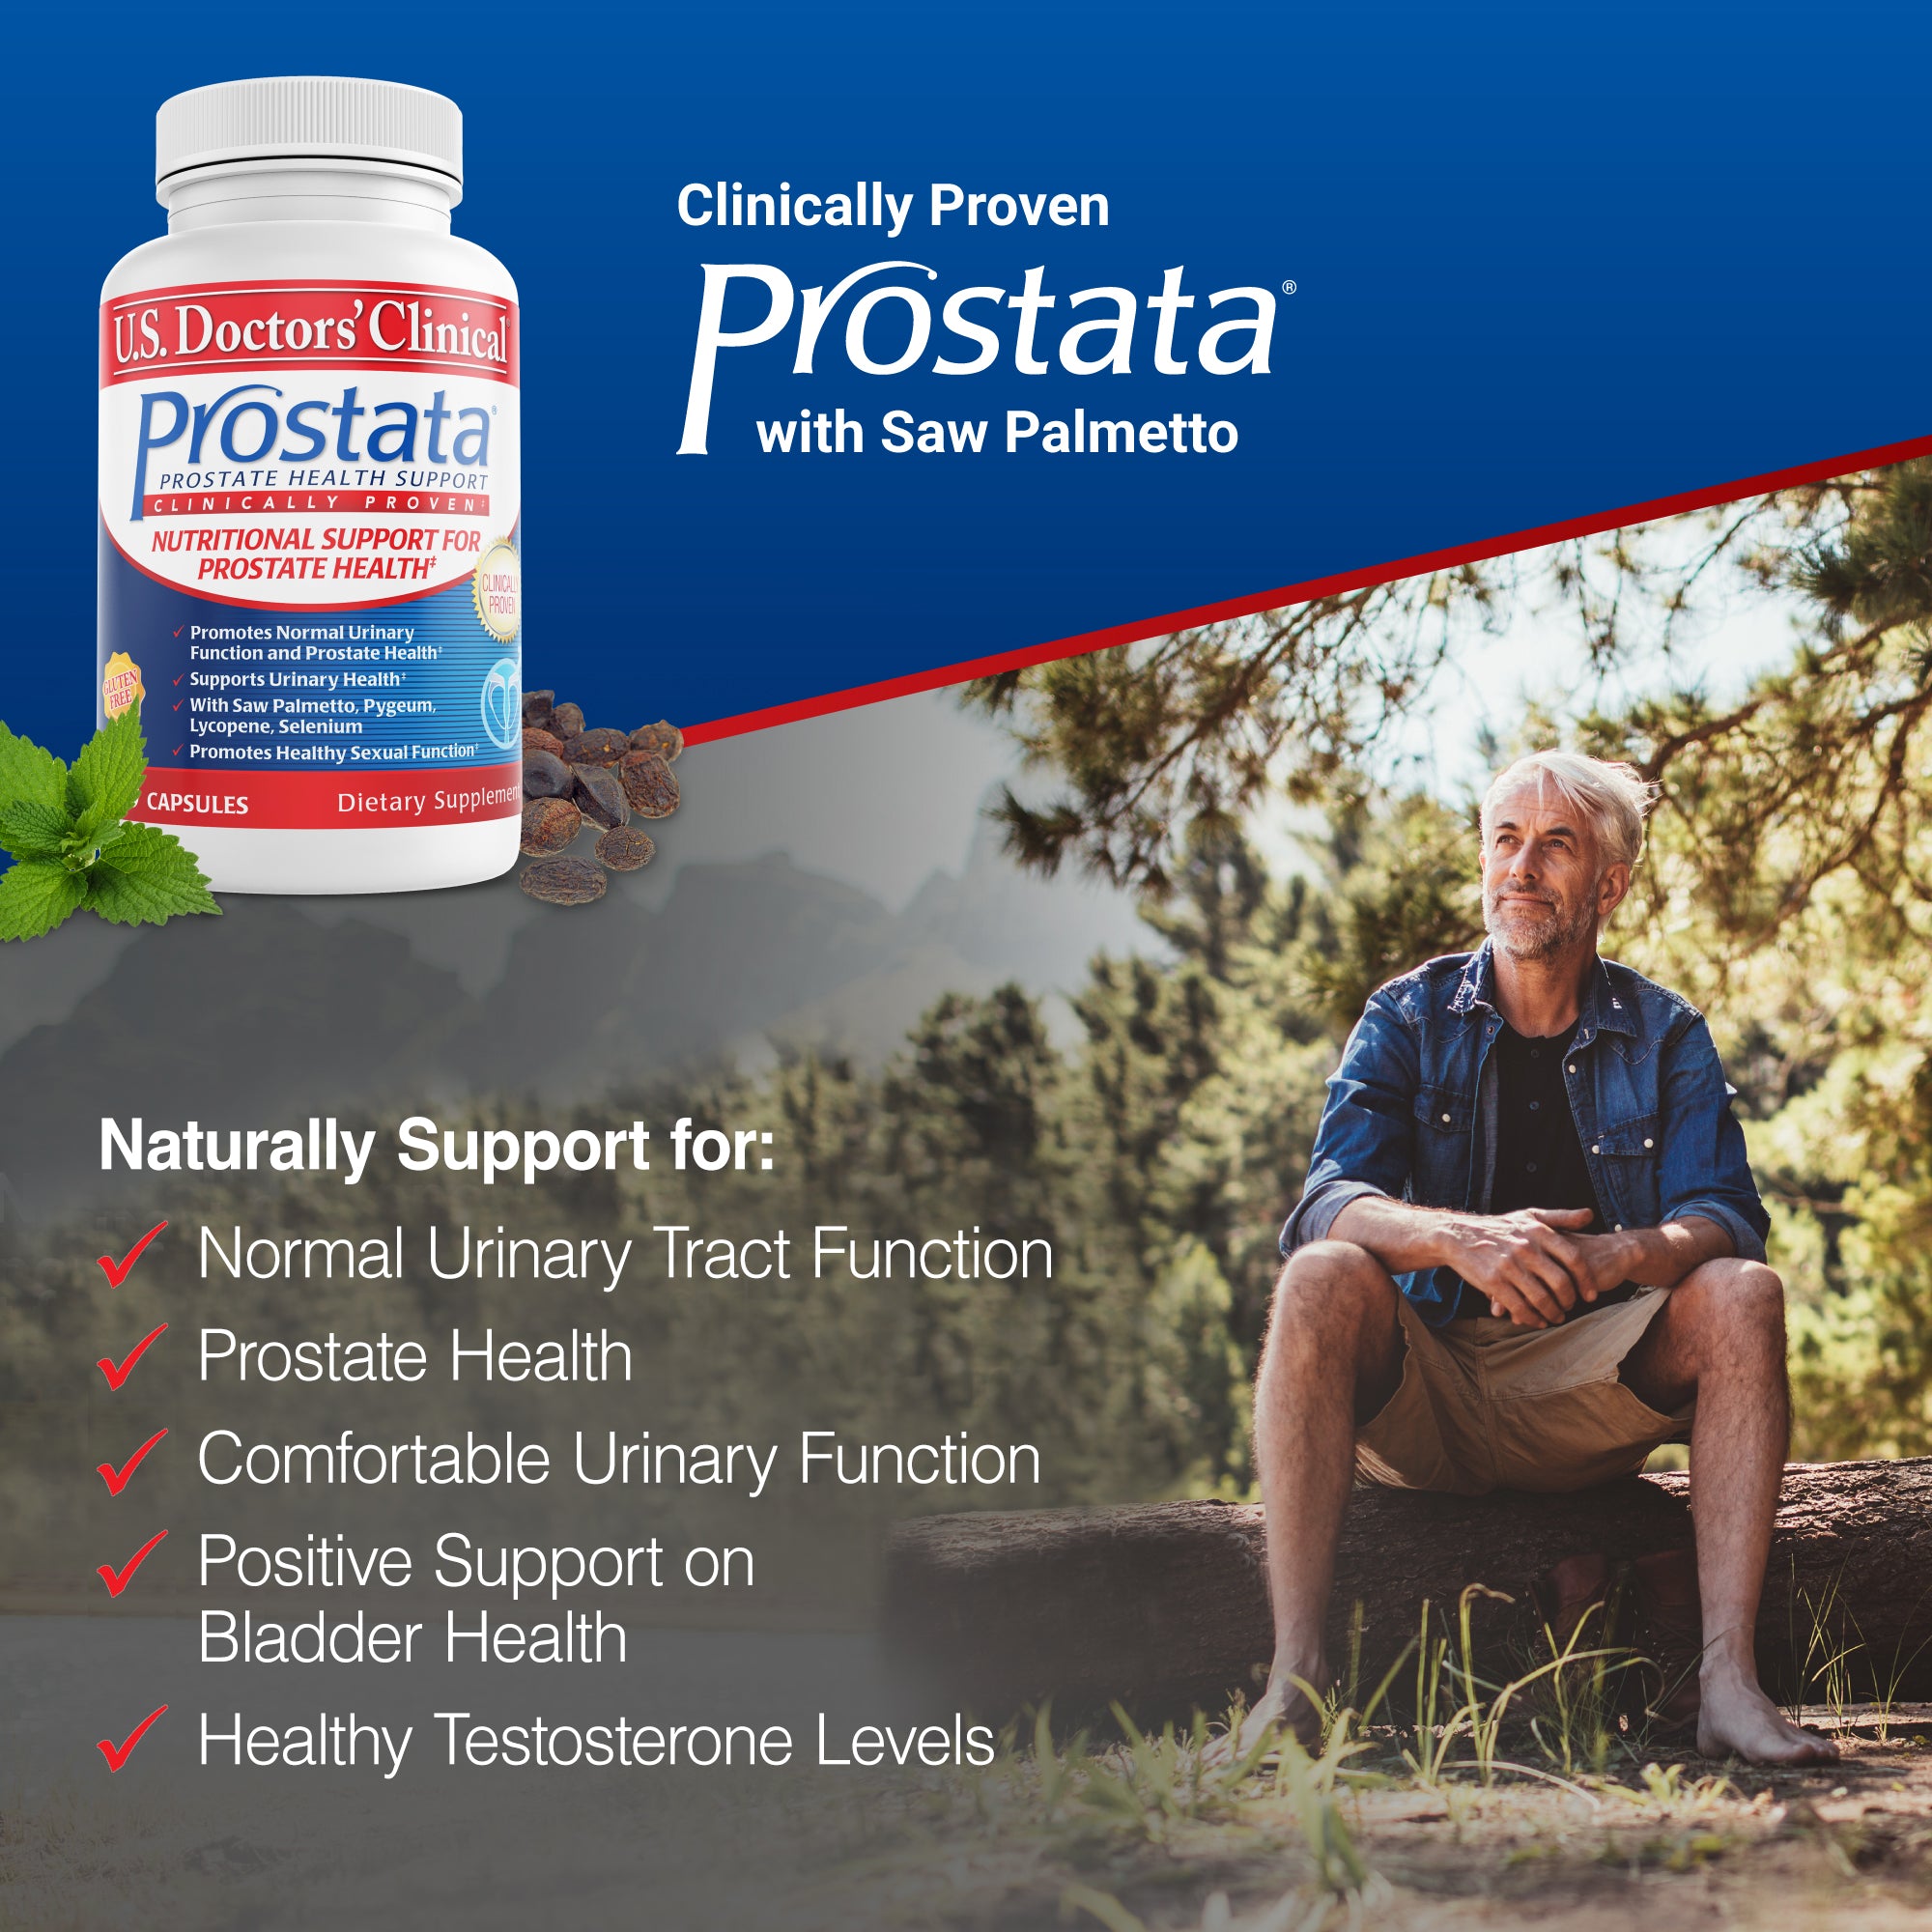 Prostata - Clinical Prostate Support